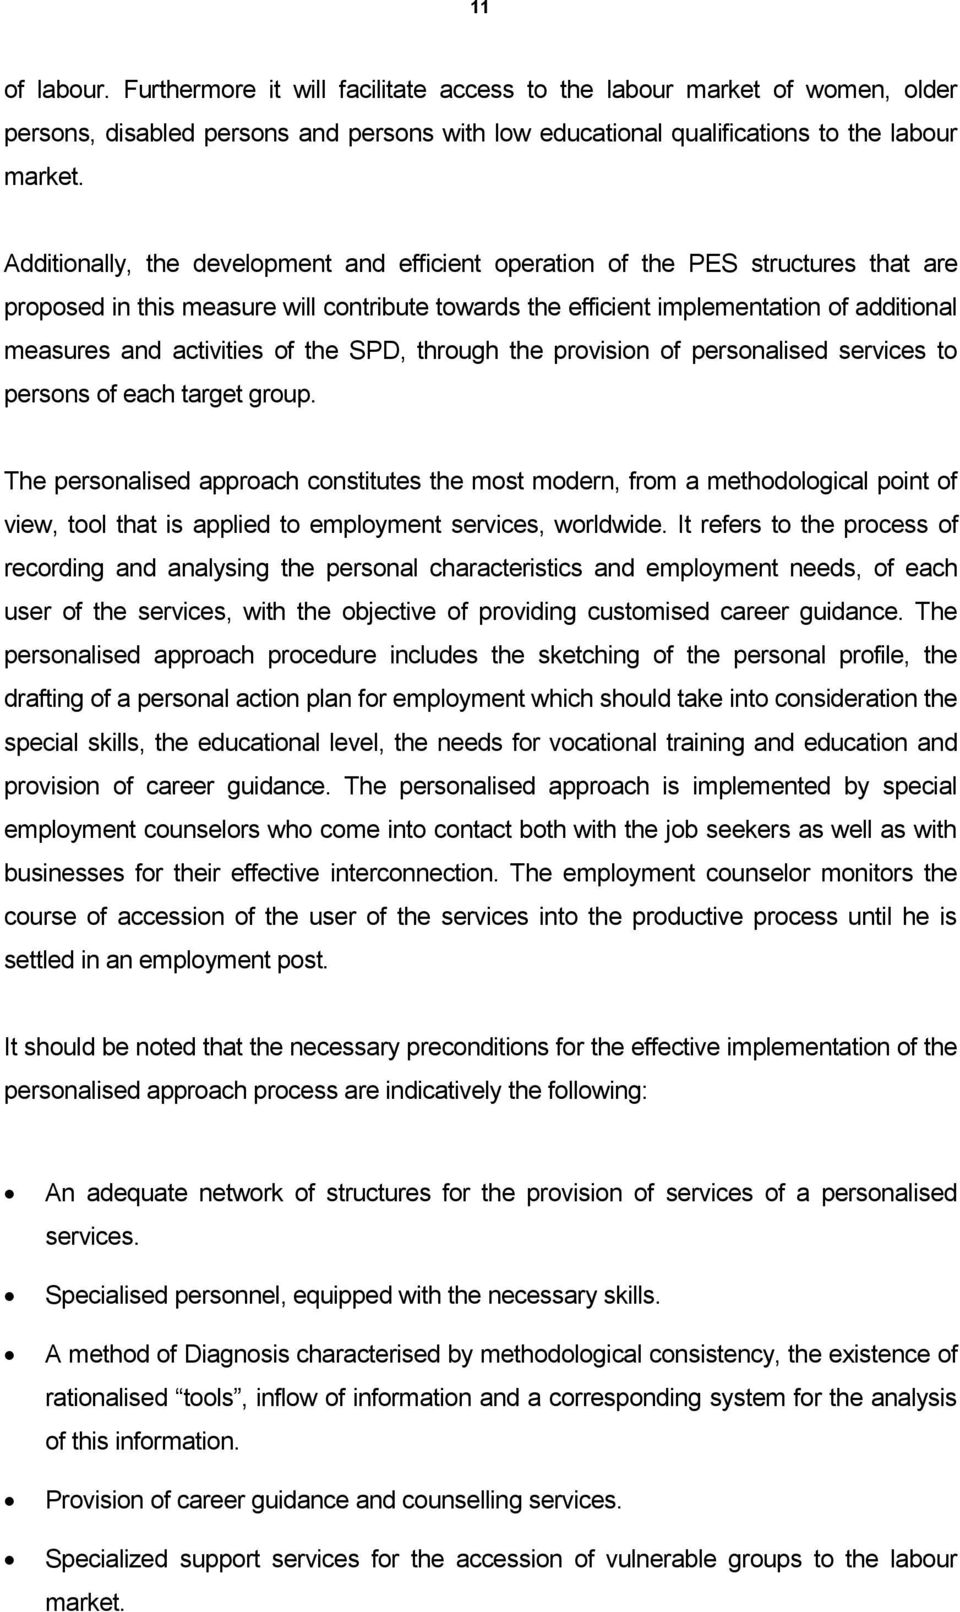 activities of the SPD, through the provision of personalised services to persons of each target group.